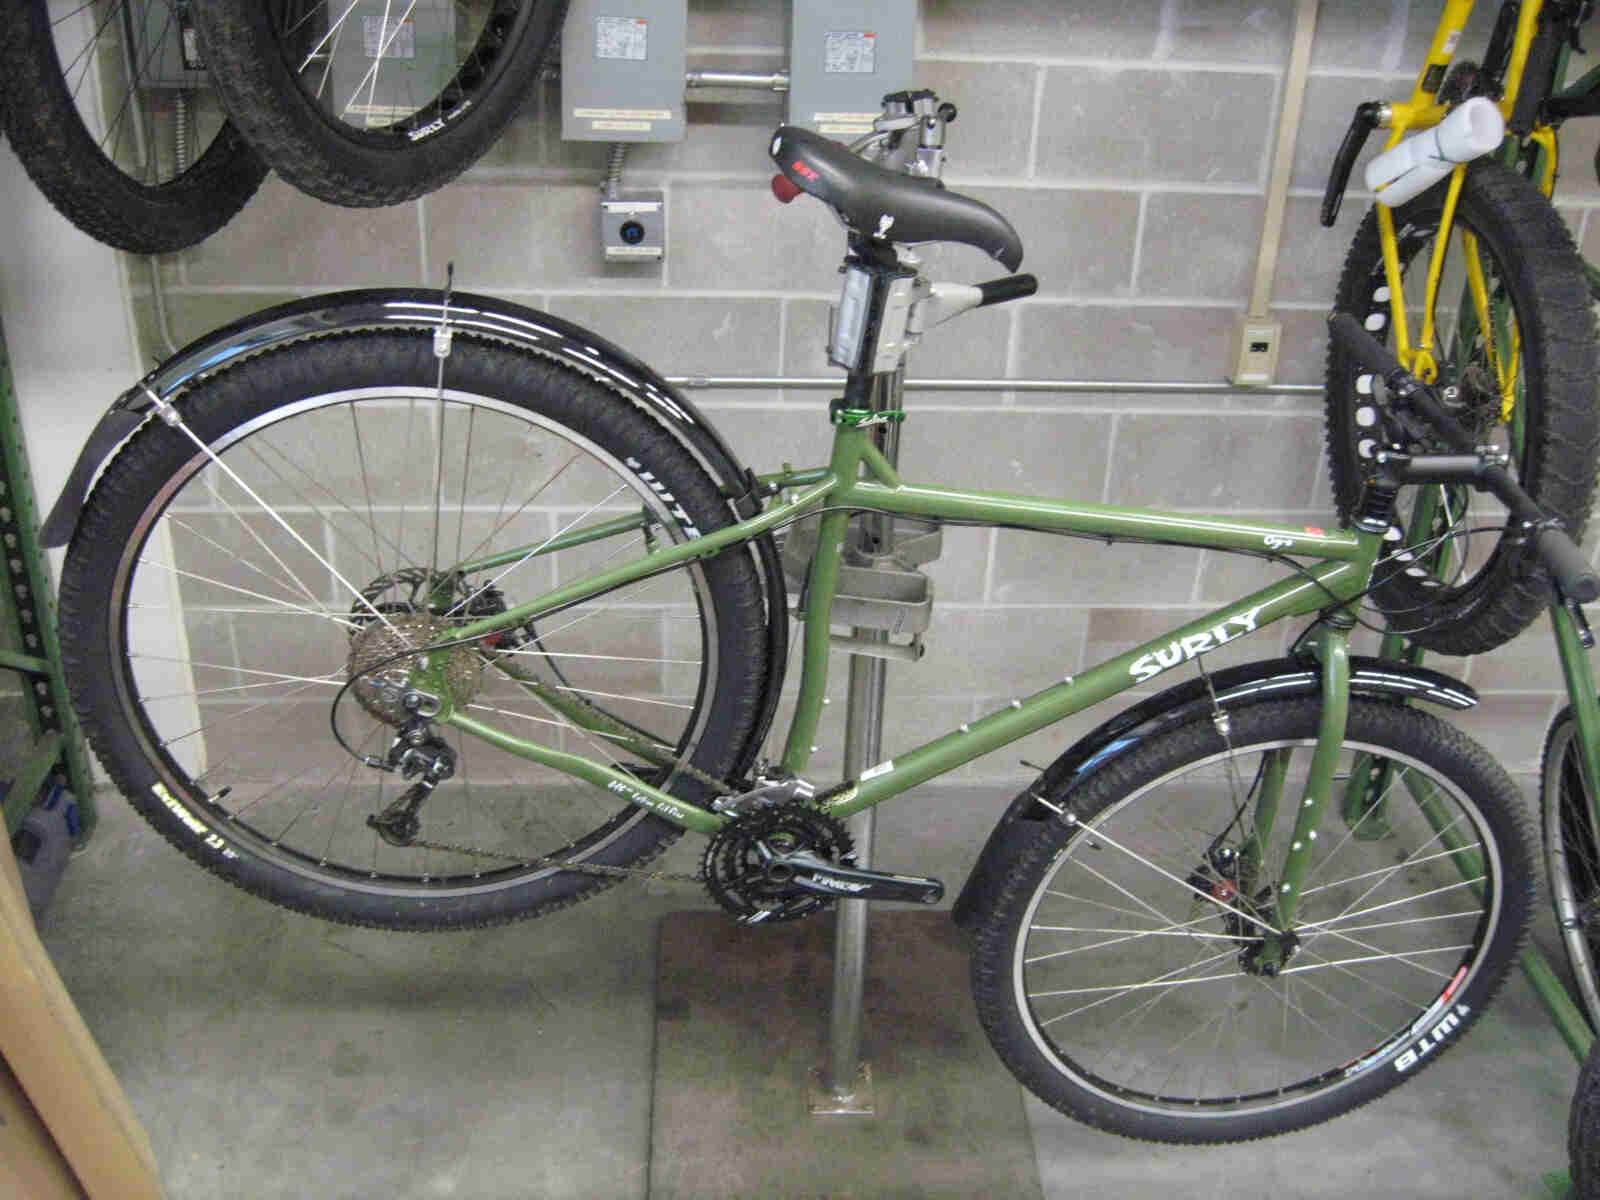 Right side view of a green Surly Ogre bike with fenders, mounted to a bike repair stand, inside a workshop room